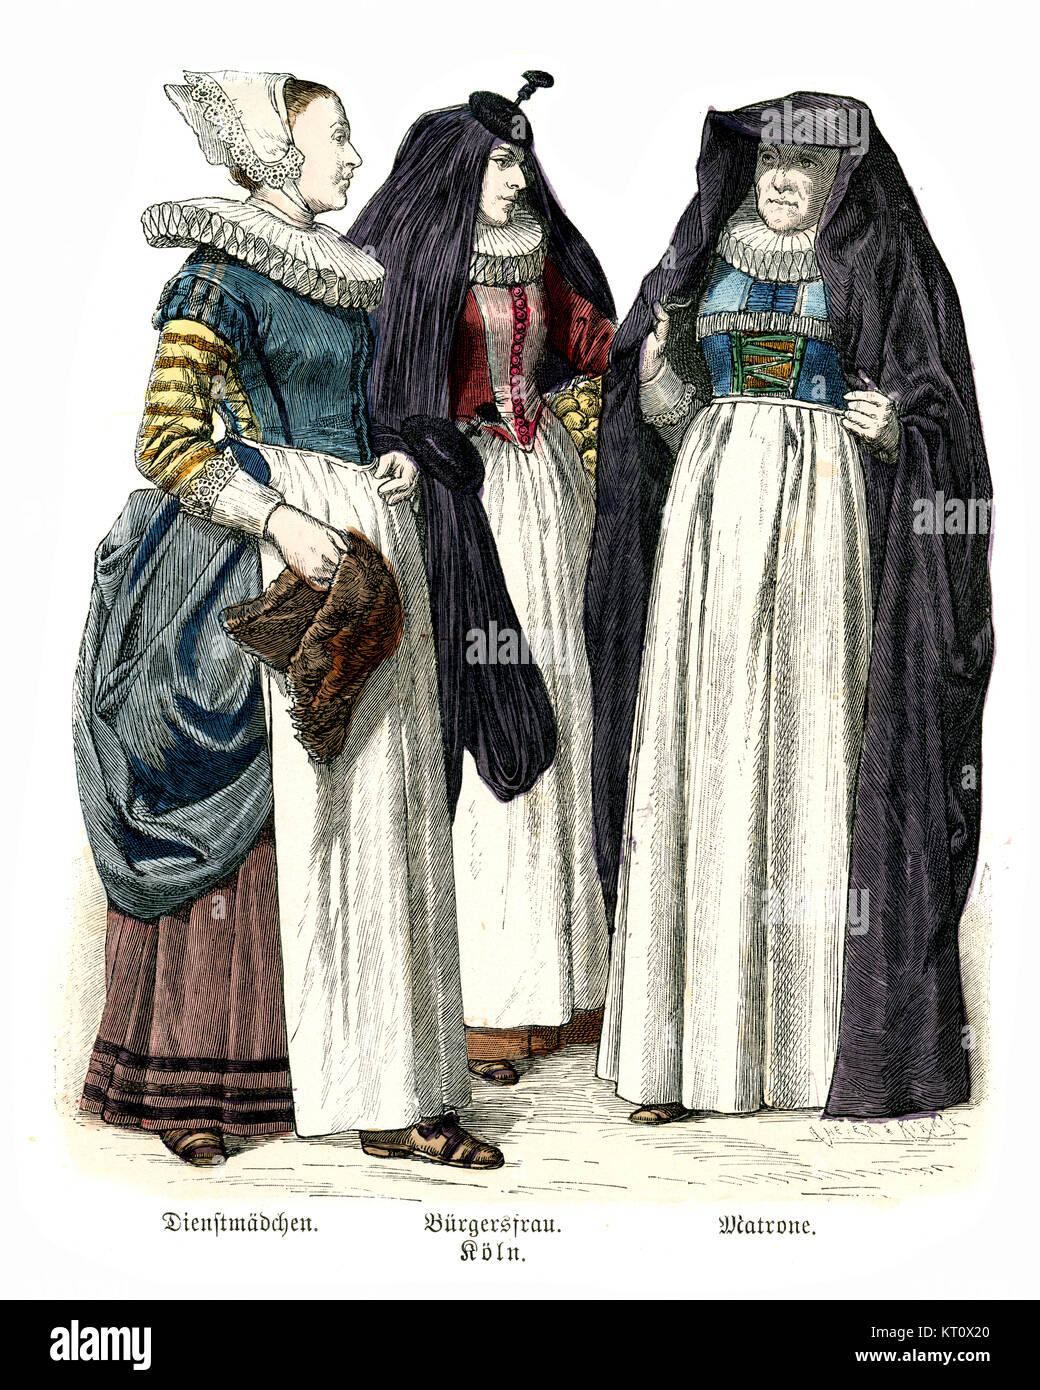 Vintage engraving of Womens fashions in Germany, 17th Century. Servent girl, citizen and matron Stock Photo